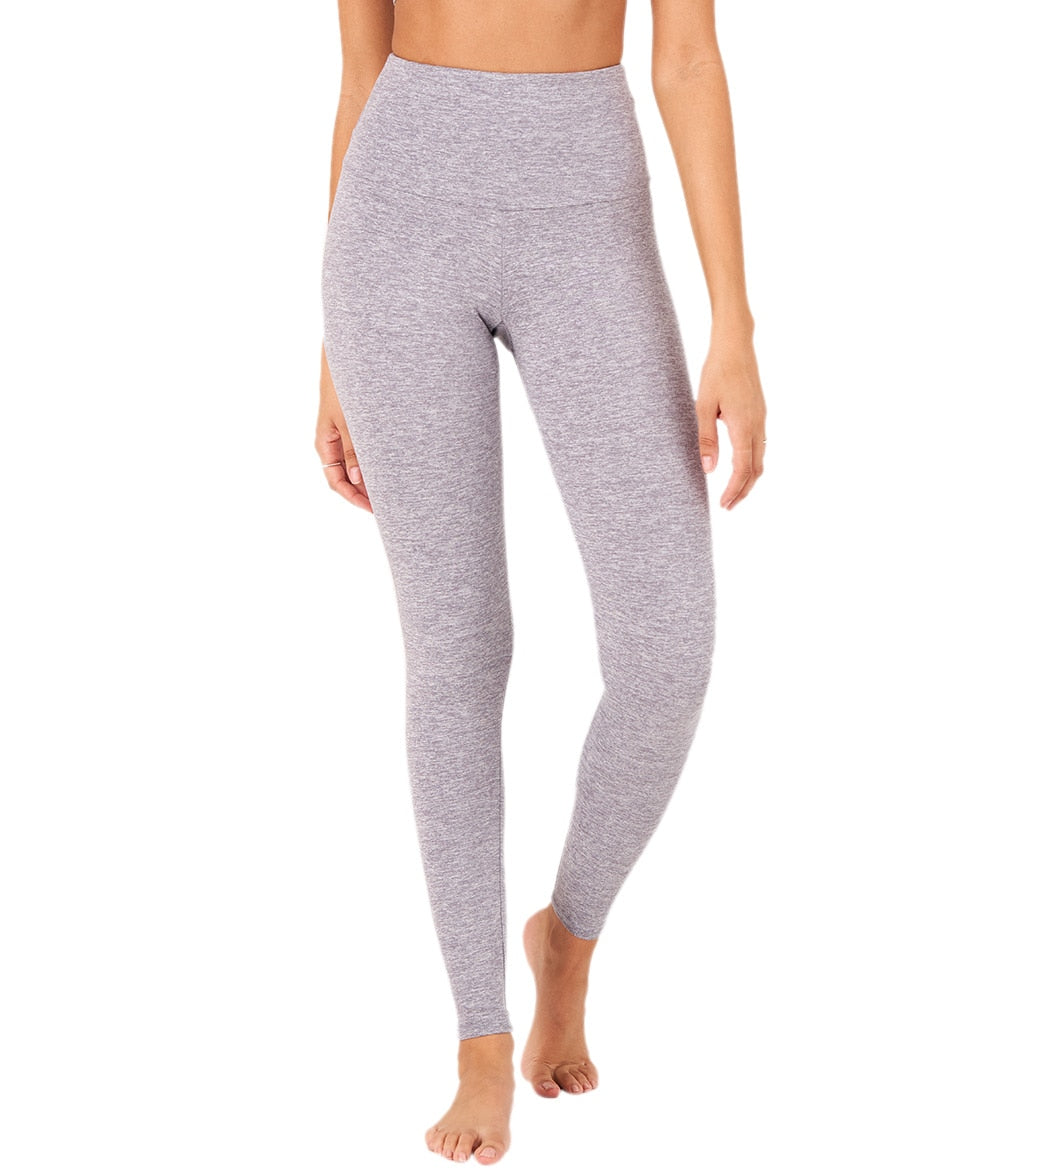 Onzie Luxe 7/8 Yoga Leggings at YogaOutlet.com - Free Shipping –